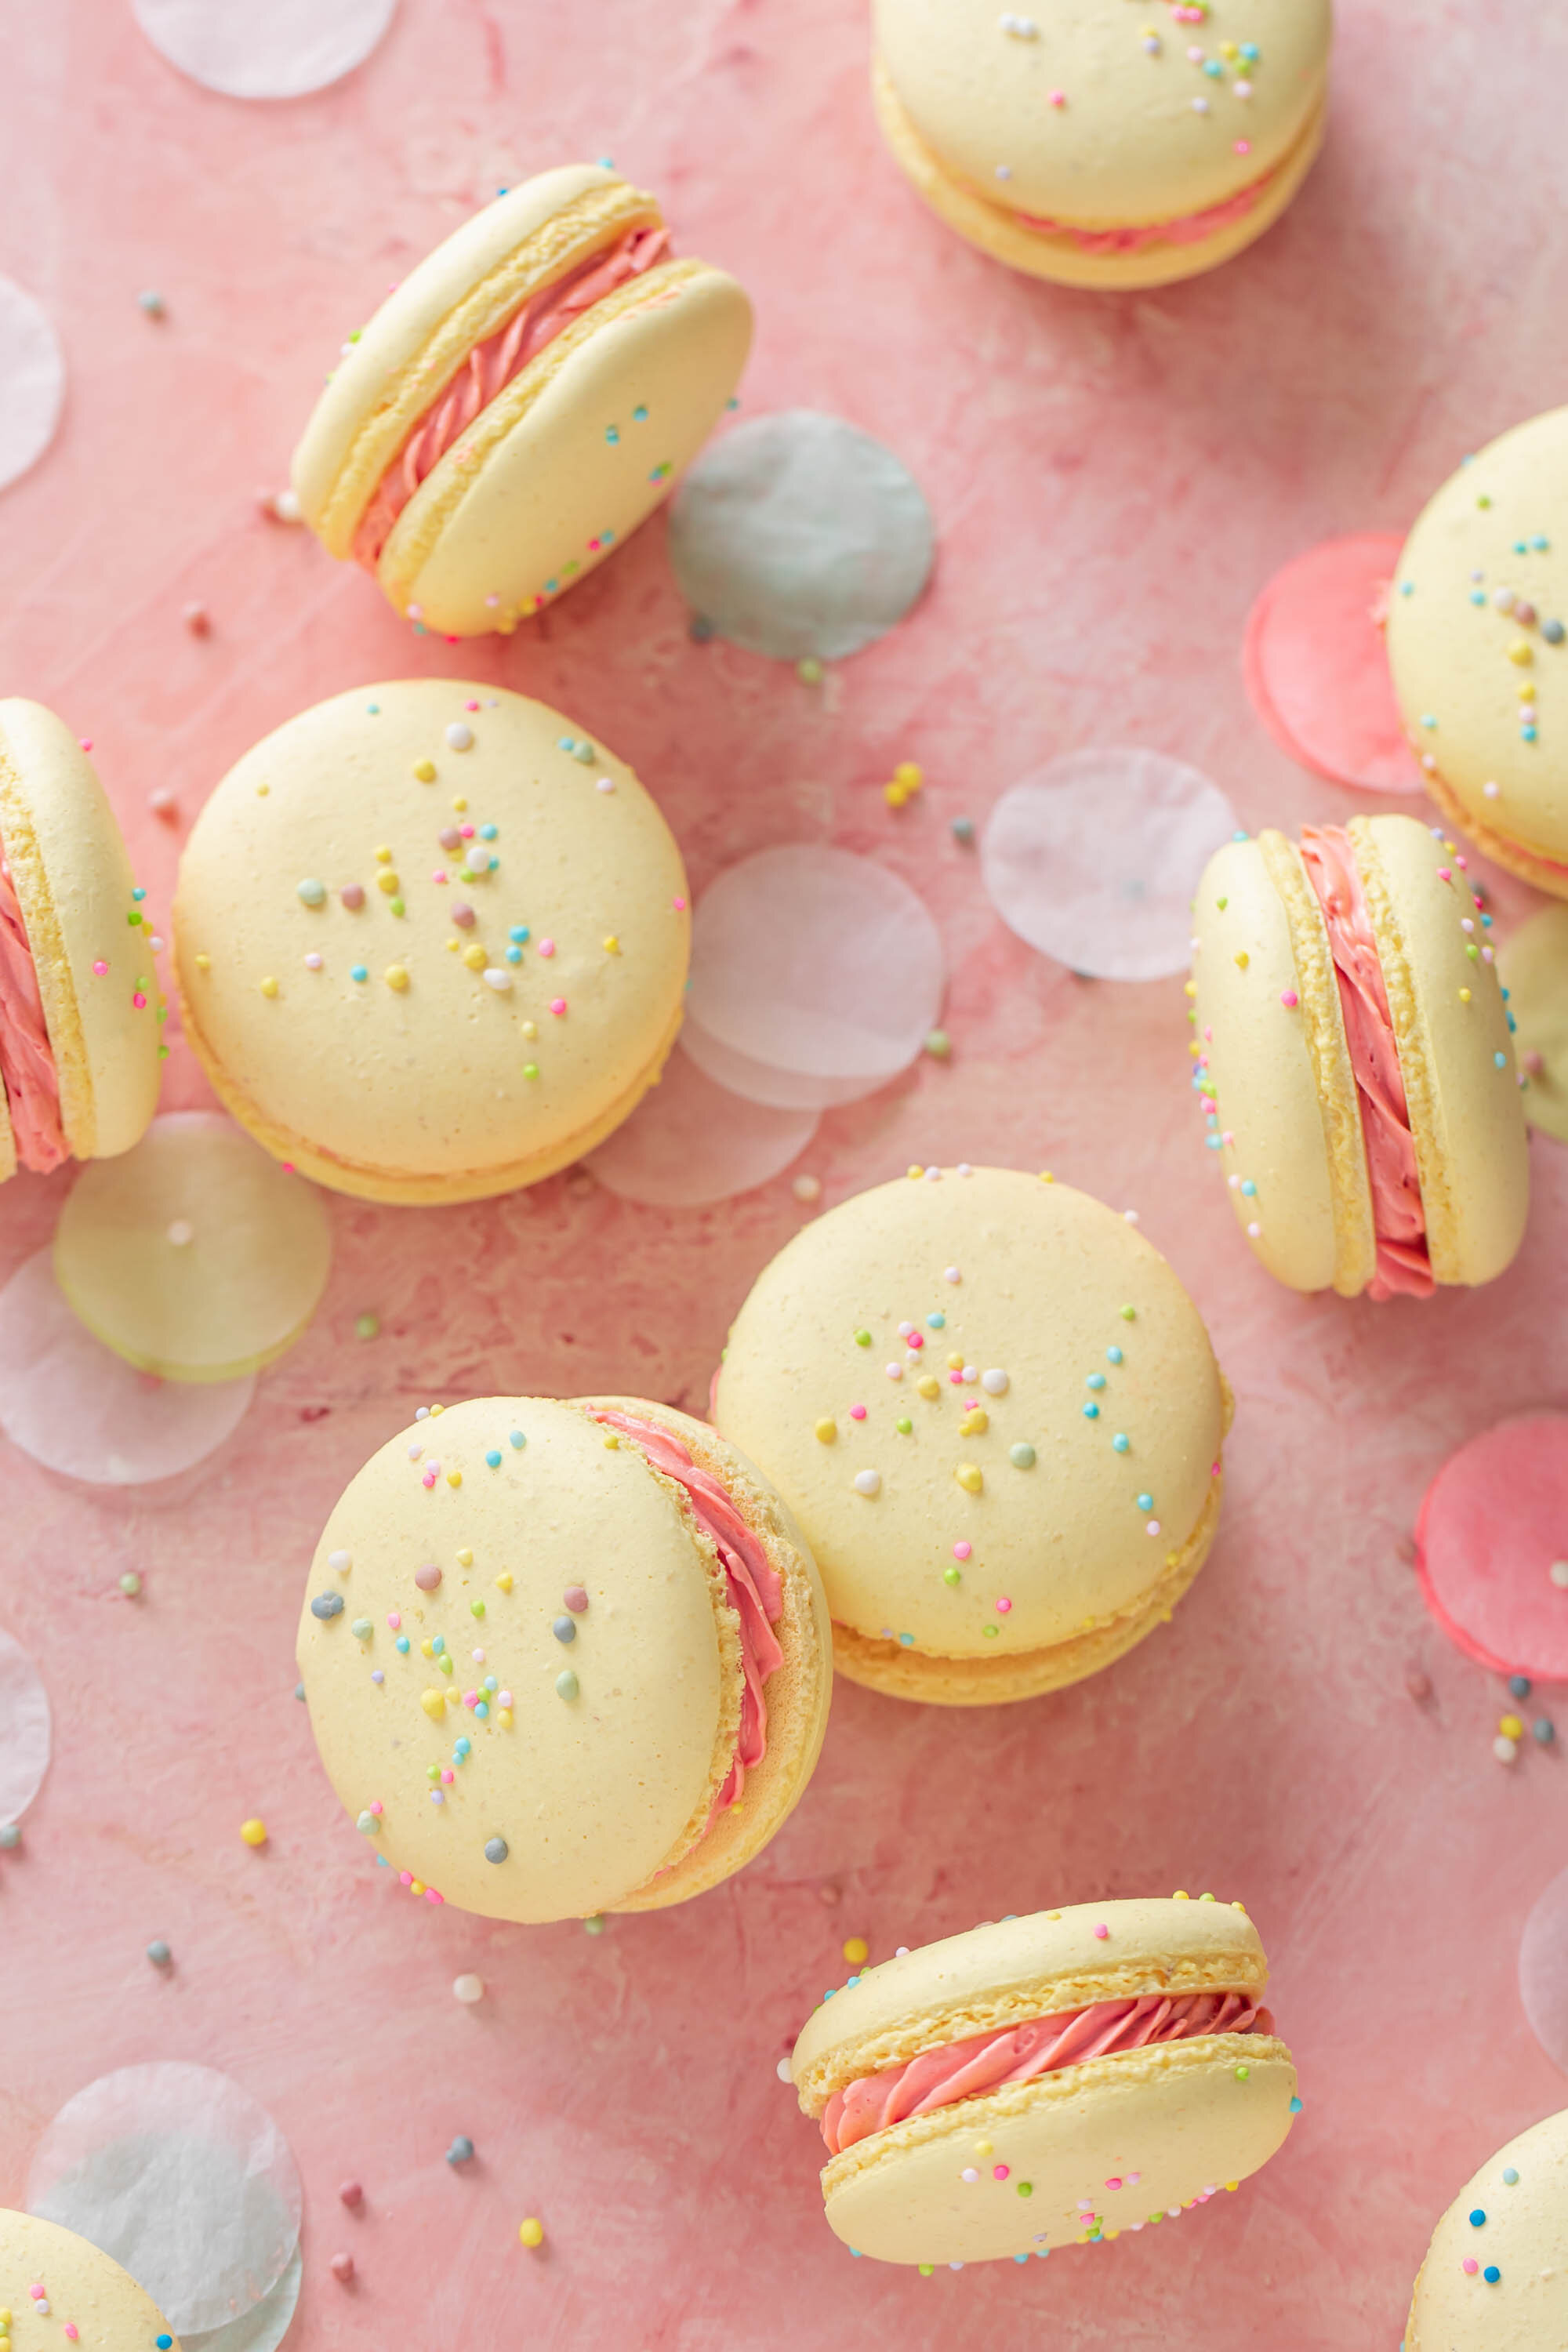 Pastel French macarons with sprinkles and pink buttercream filling scattered on a pink table with confetti.